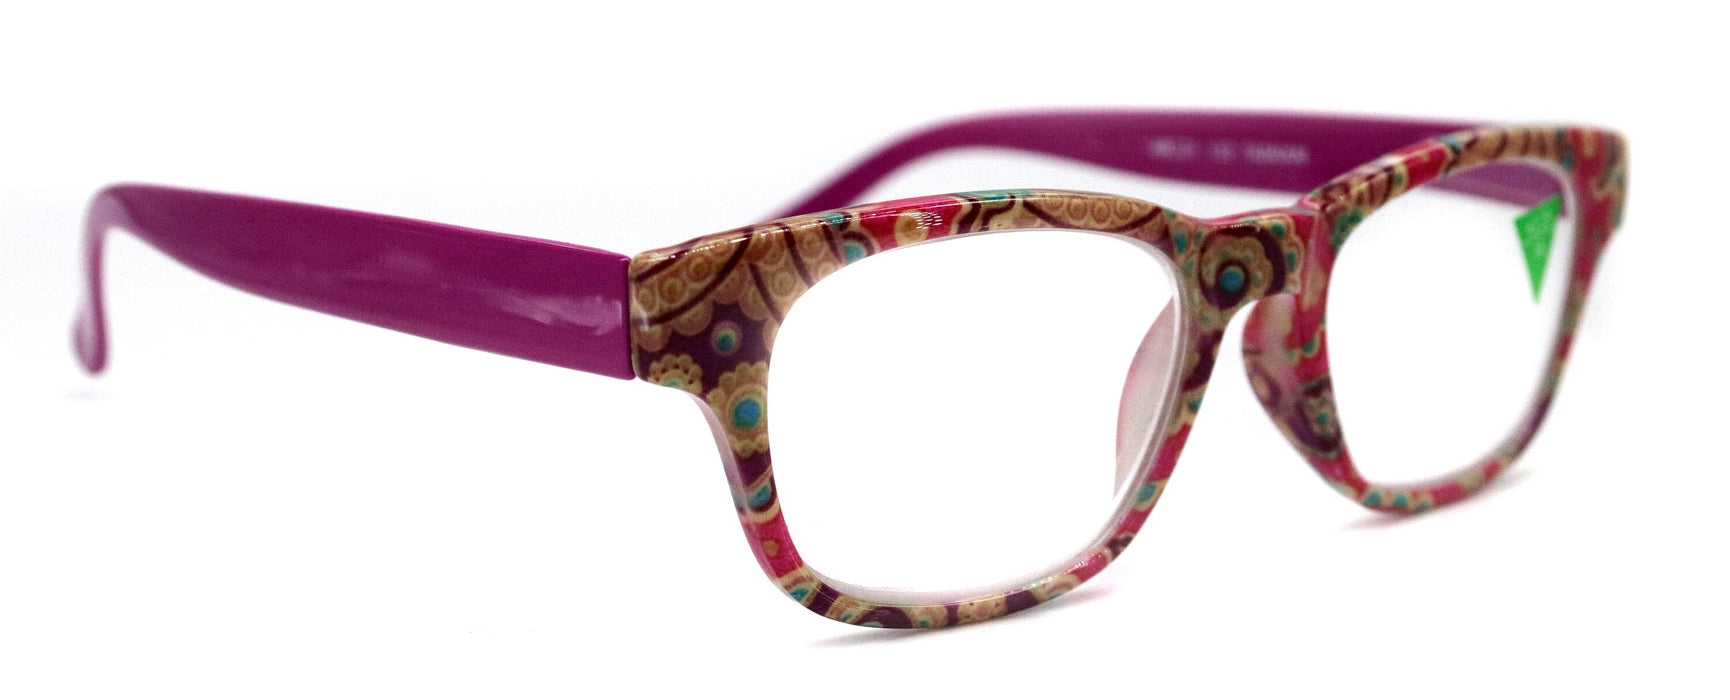 Persia, (Premium) Reading Glasses High End Reader +1.25..+3 Magnifying Eyeglass, Square Optical Frame (Pink Fuchsia) Paisley NY Fifth Avenue